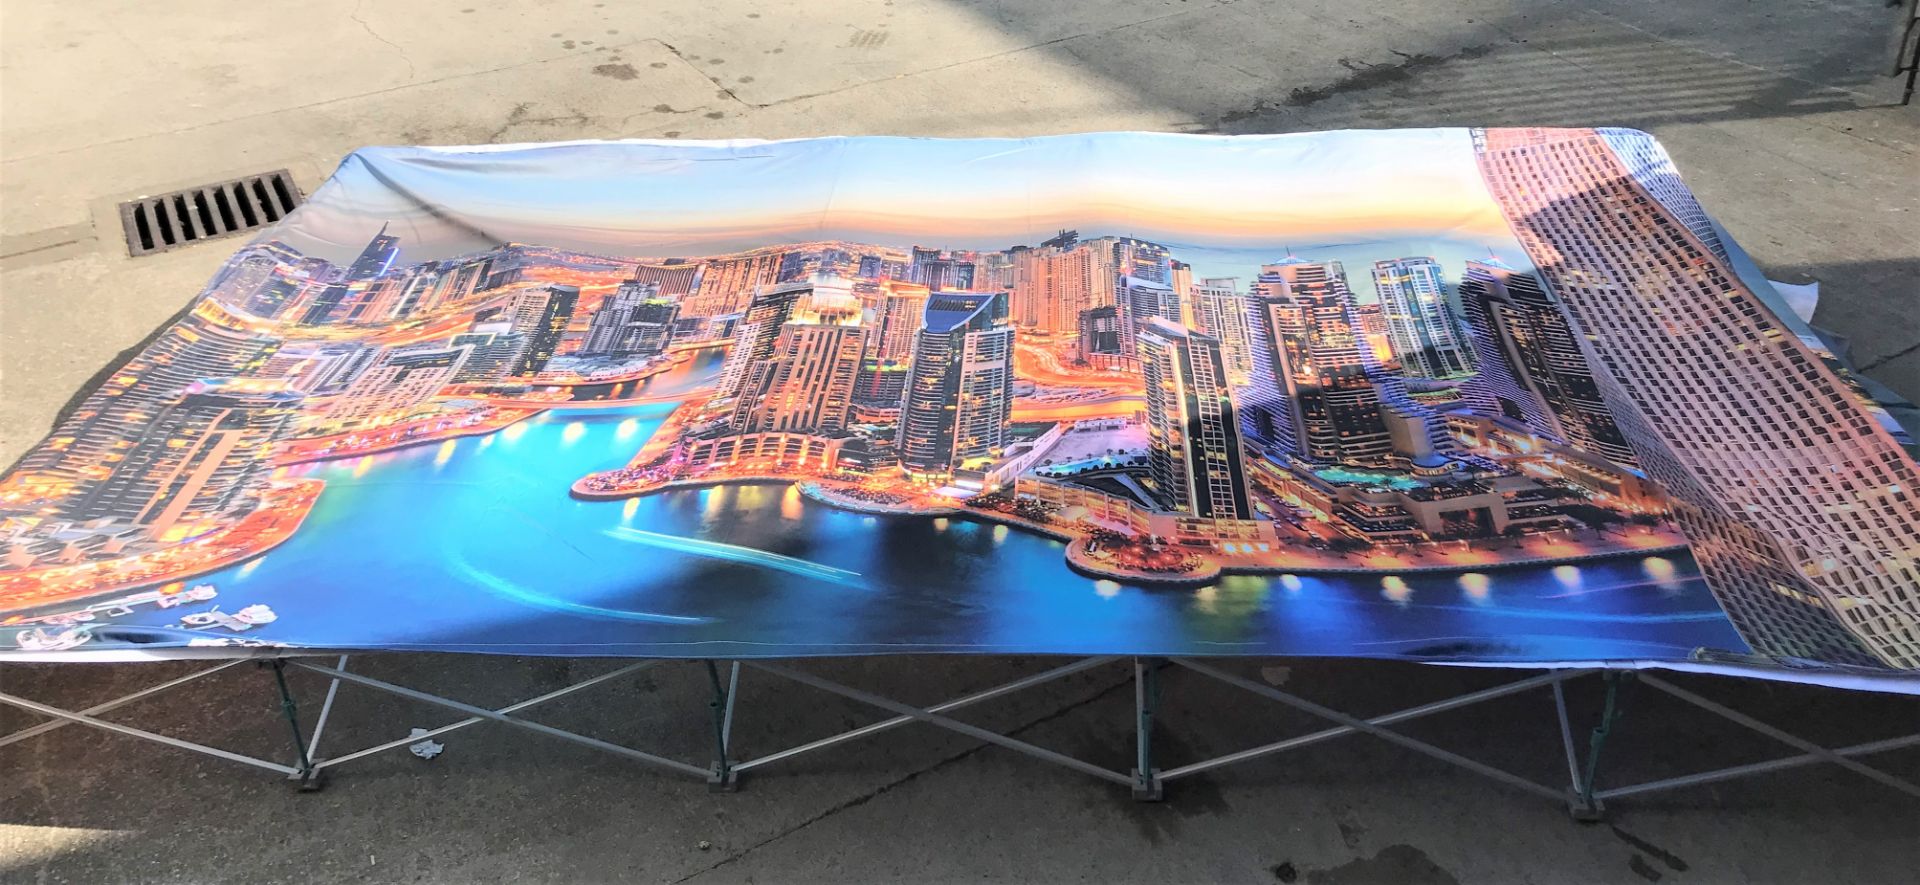 A Lightweight Fabric Pop Up Frame, 3700mm x 2250mm (360mm x 270mm x 700mm closed) with Cityscape